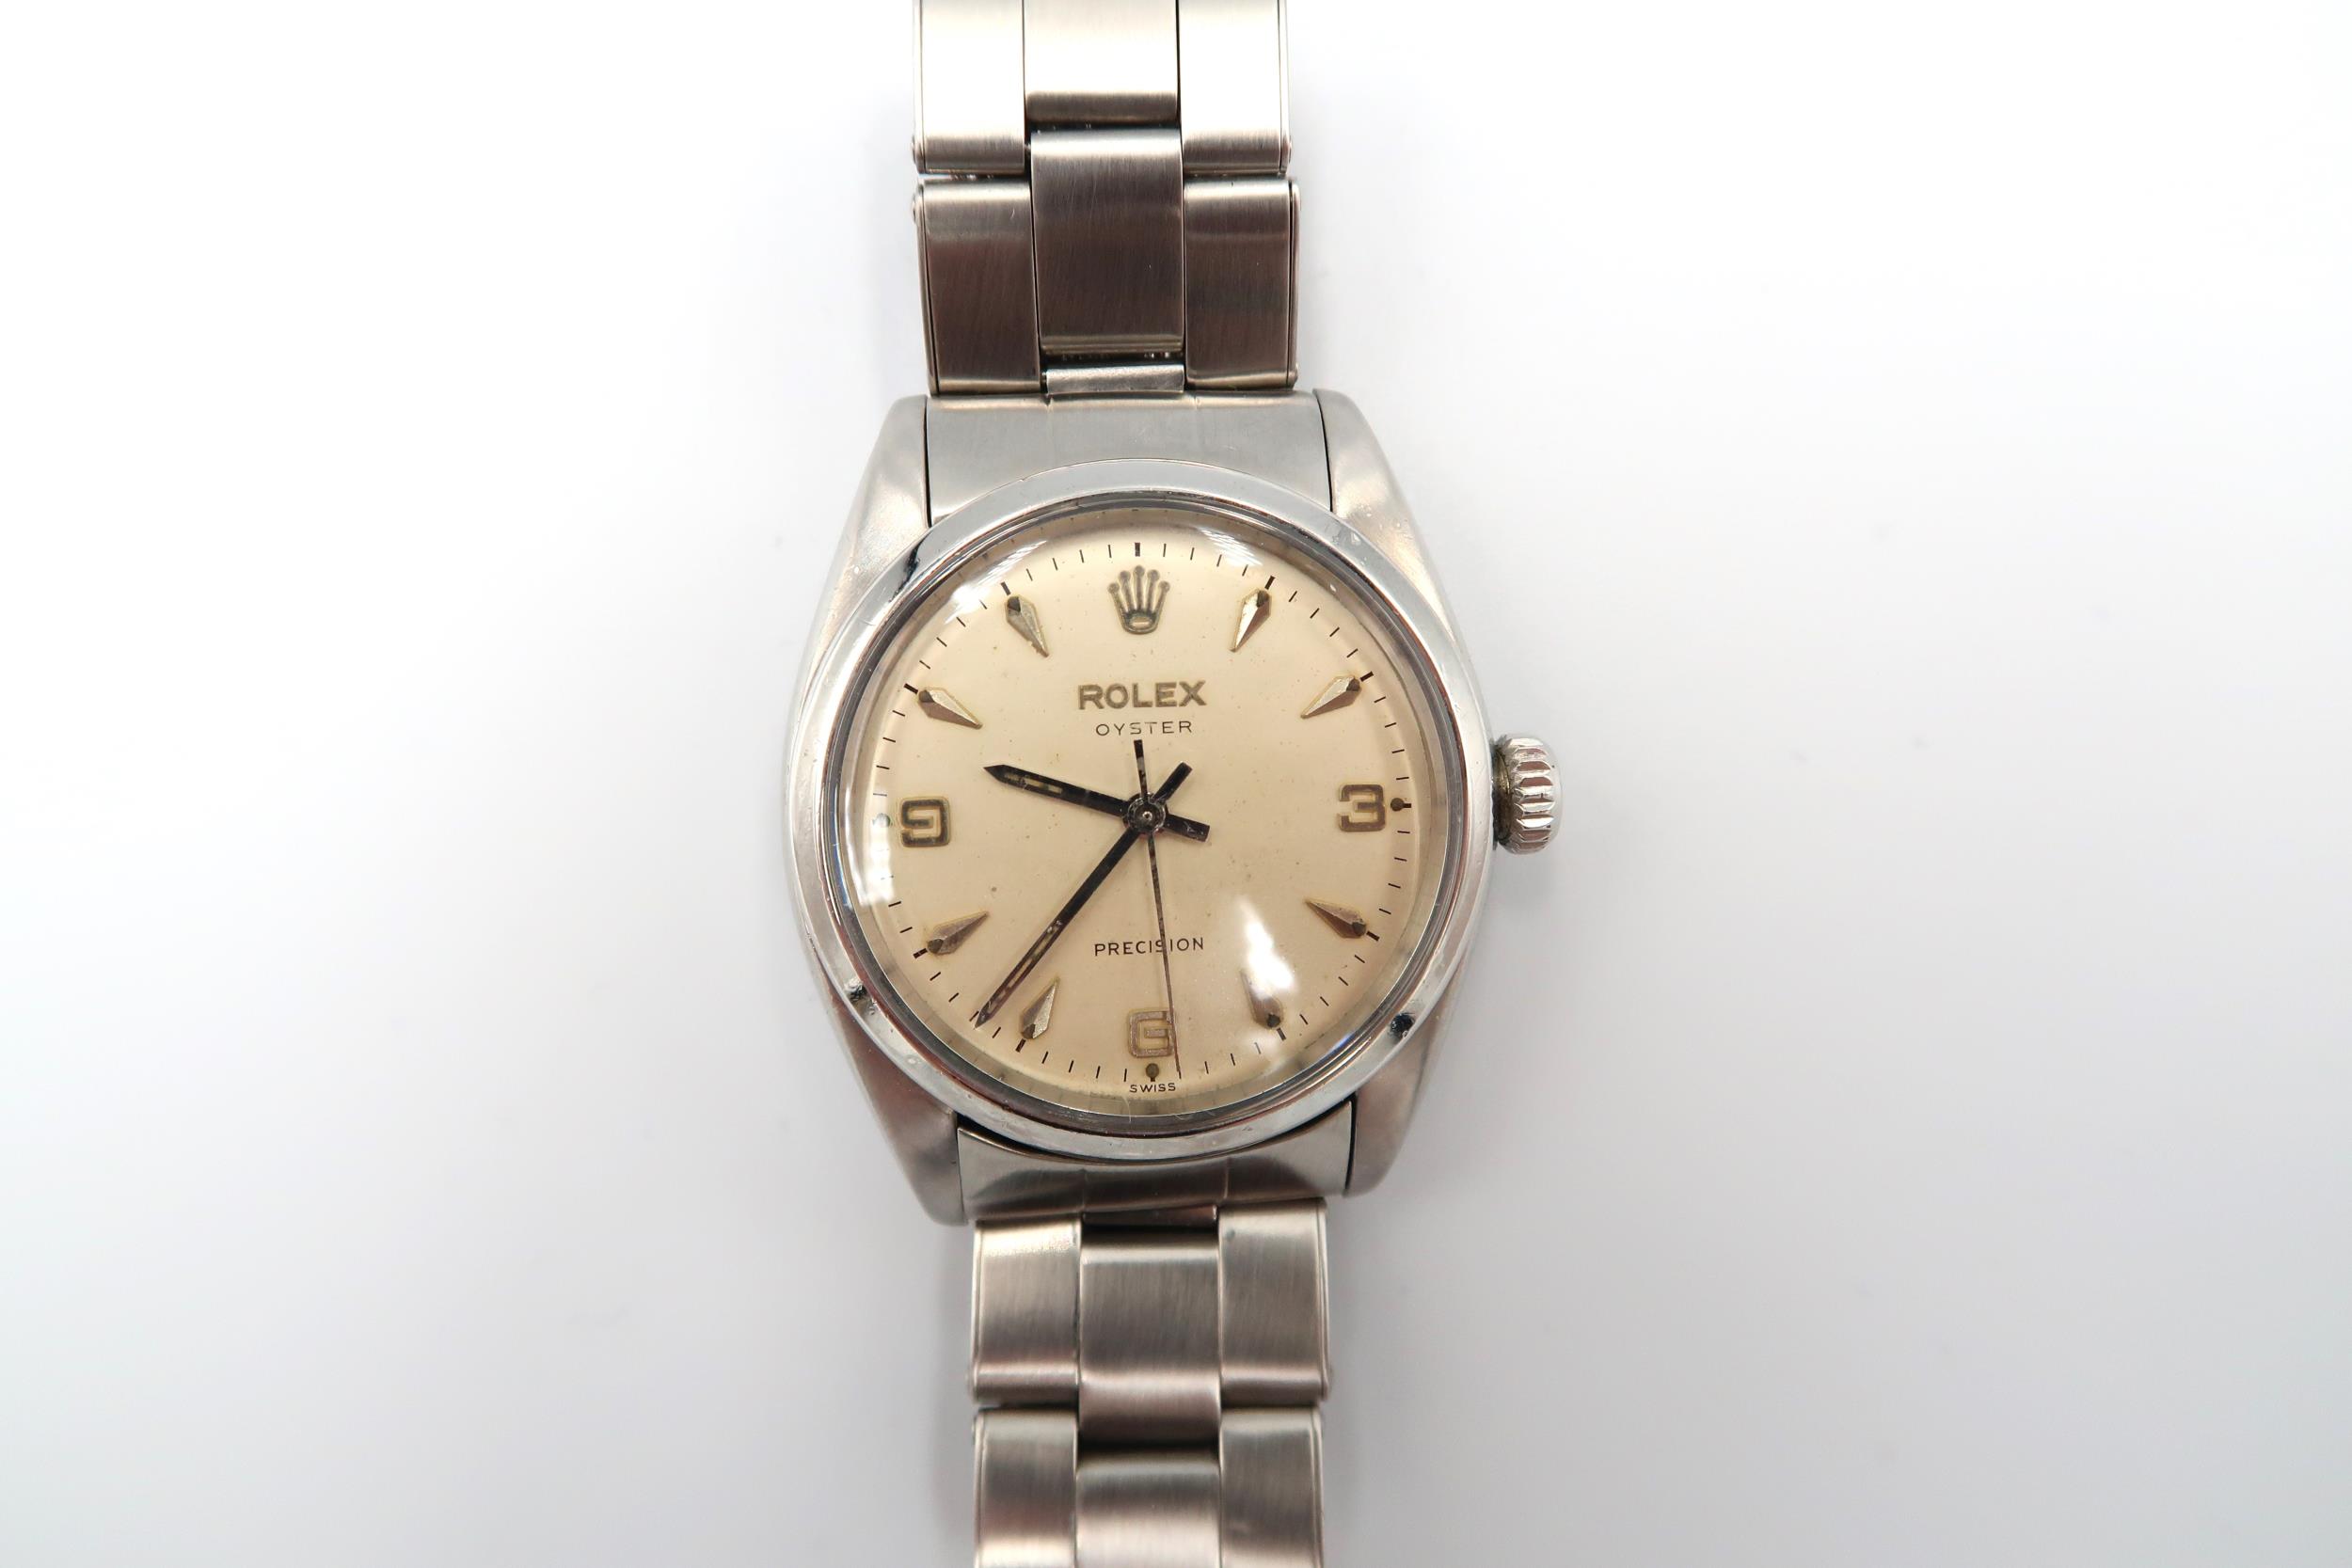 An early Gents steel cased Rolex Oyster precision wristwatch - diameter 35mm not including screw - Image 2 of 5